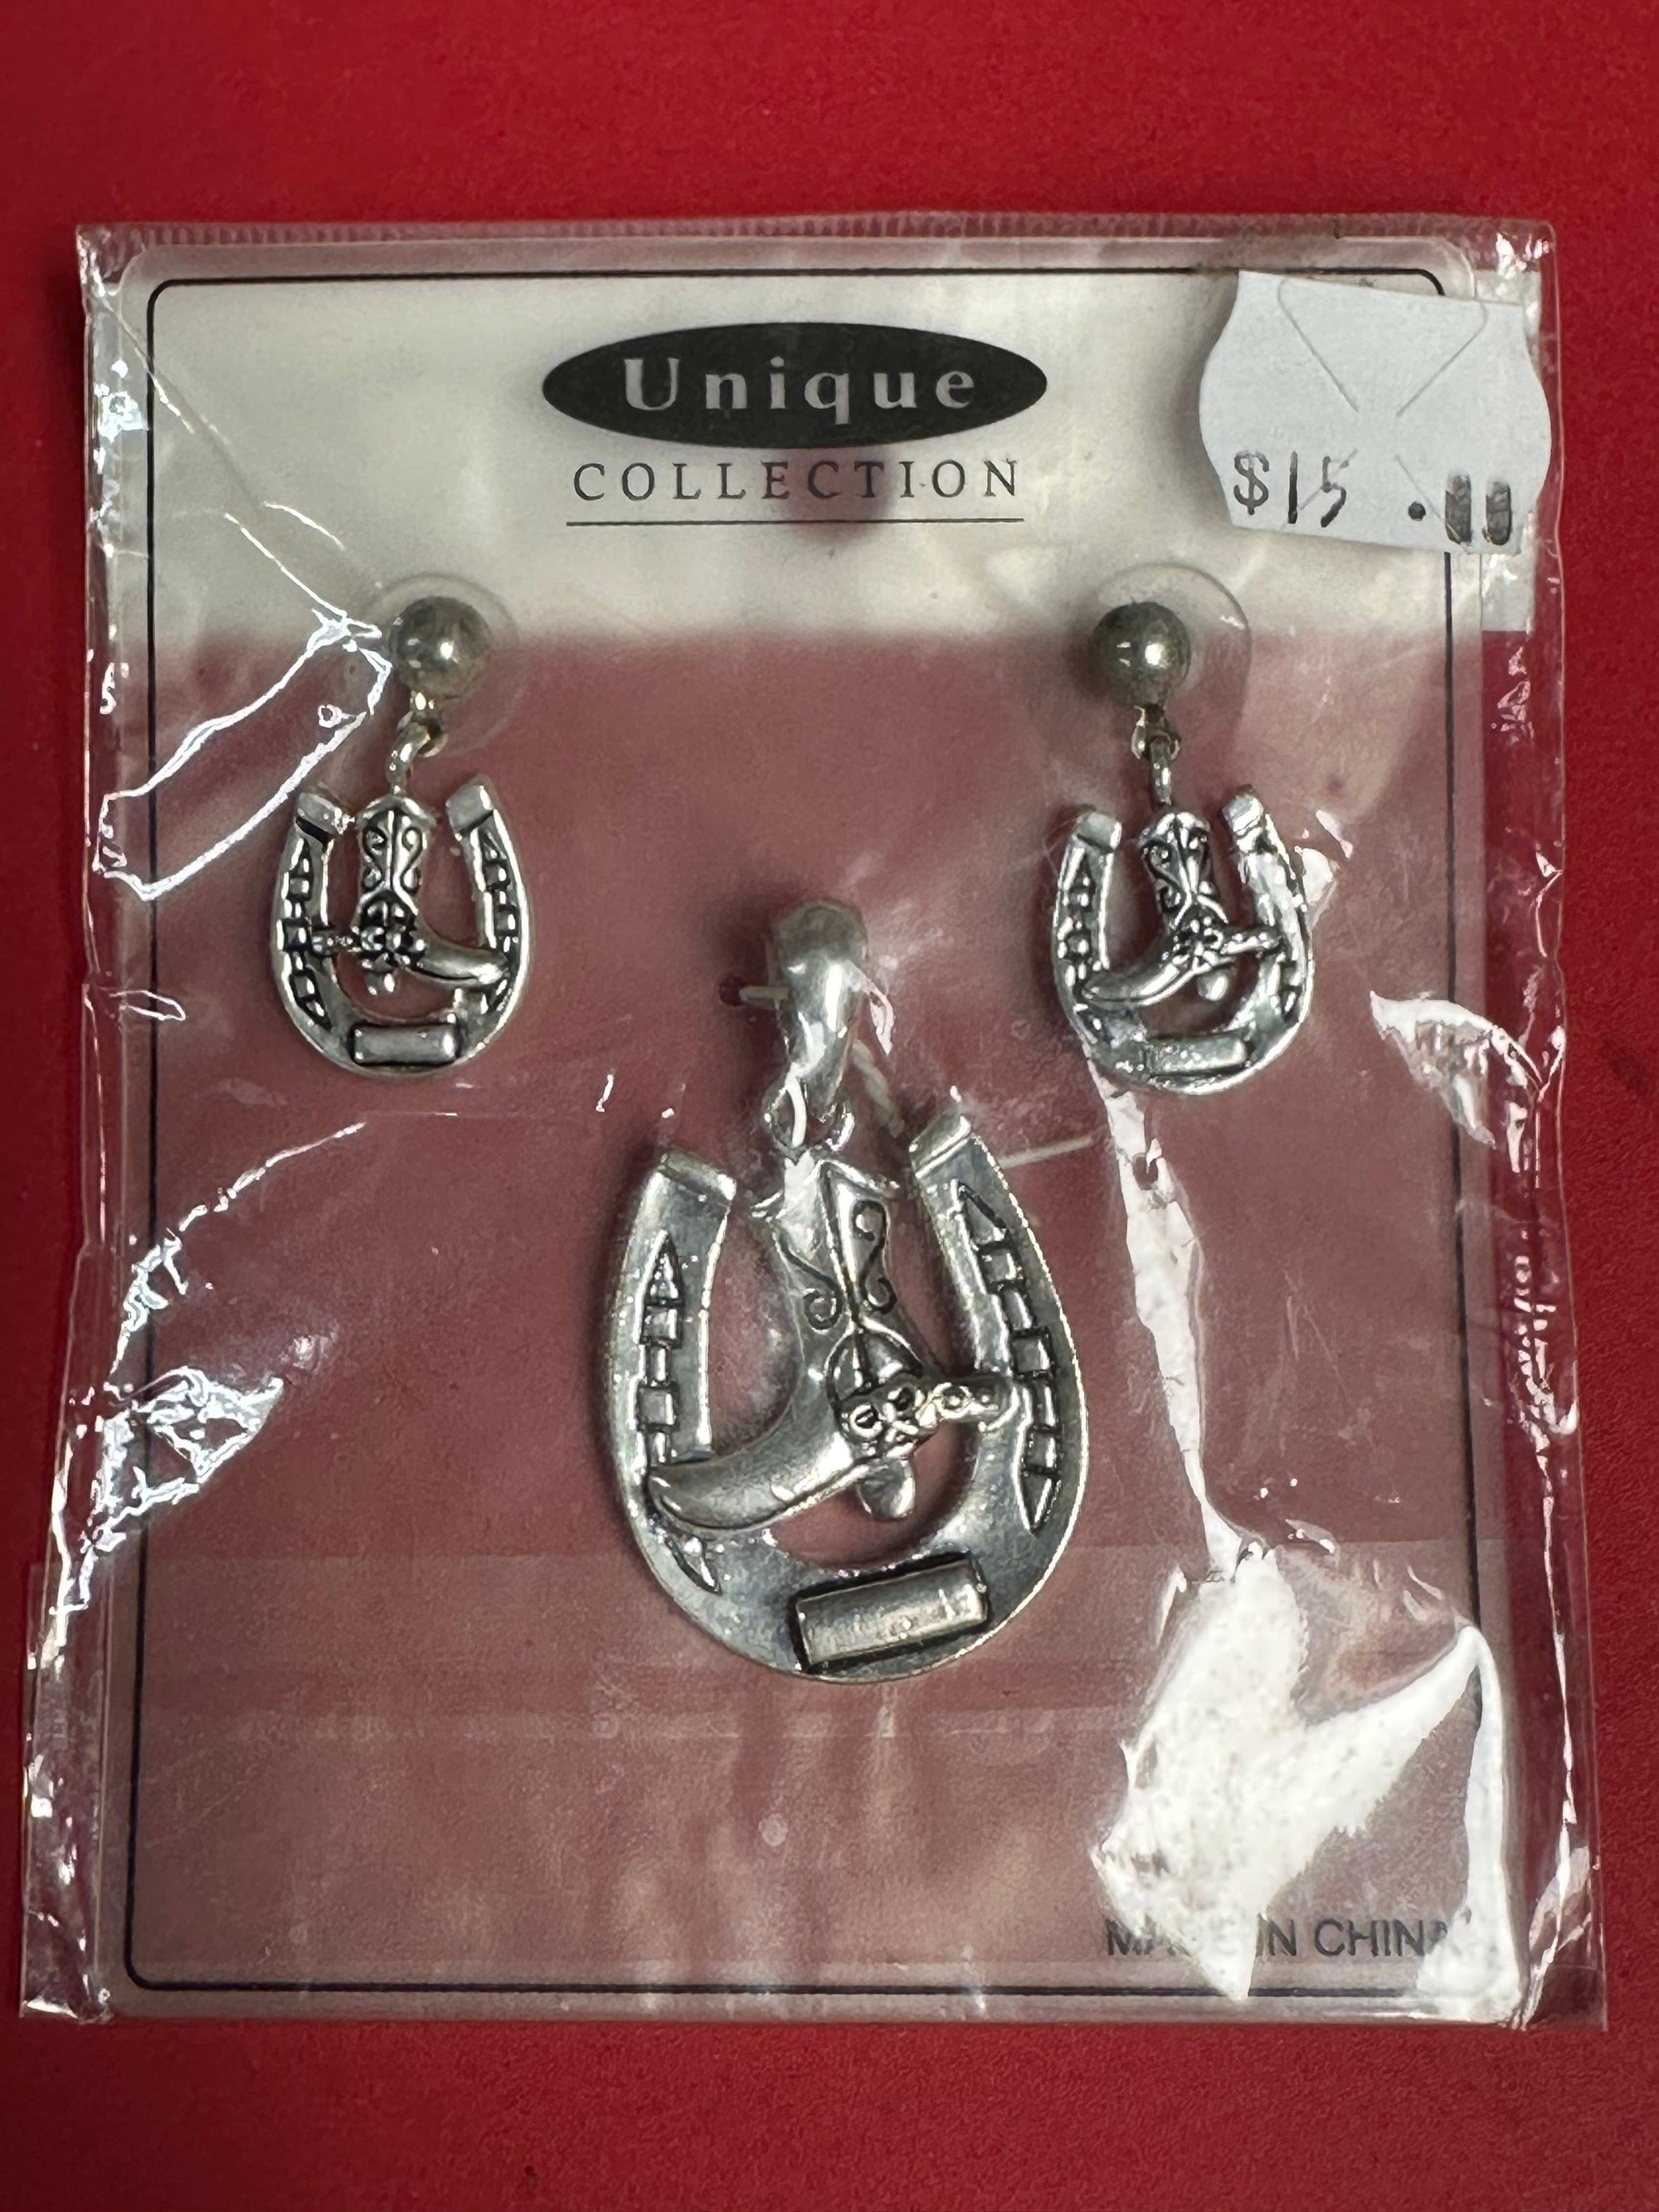 A Square Up Fashions horseshoe necklace charm and earrings set in a package.